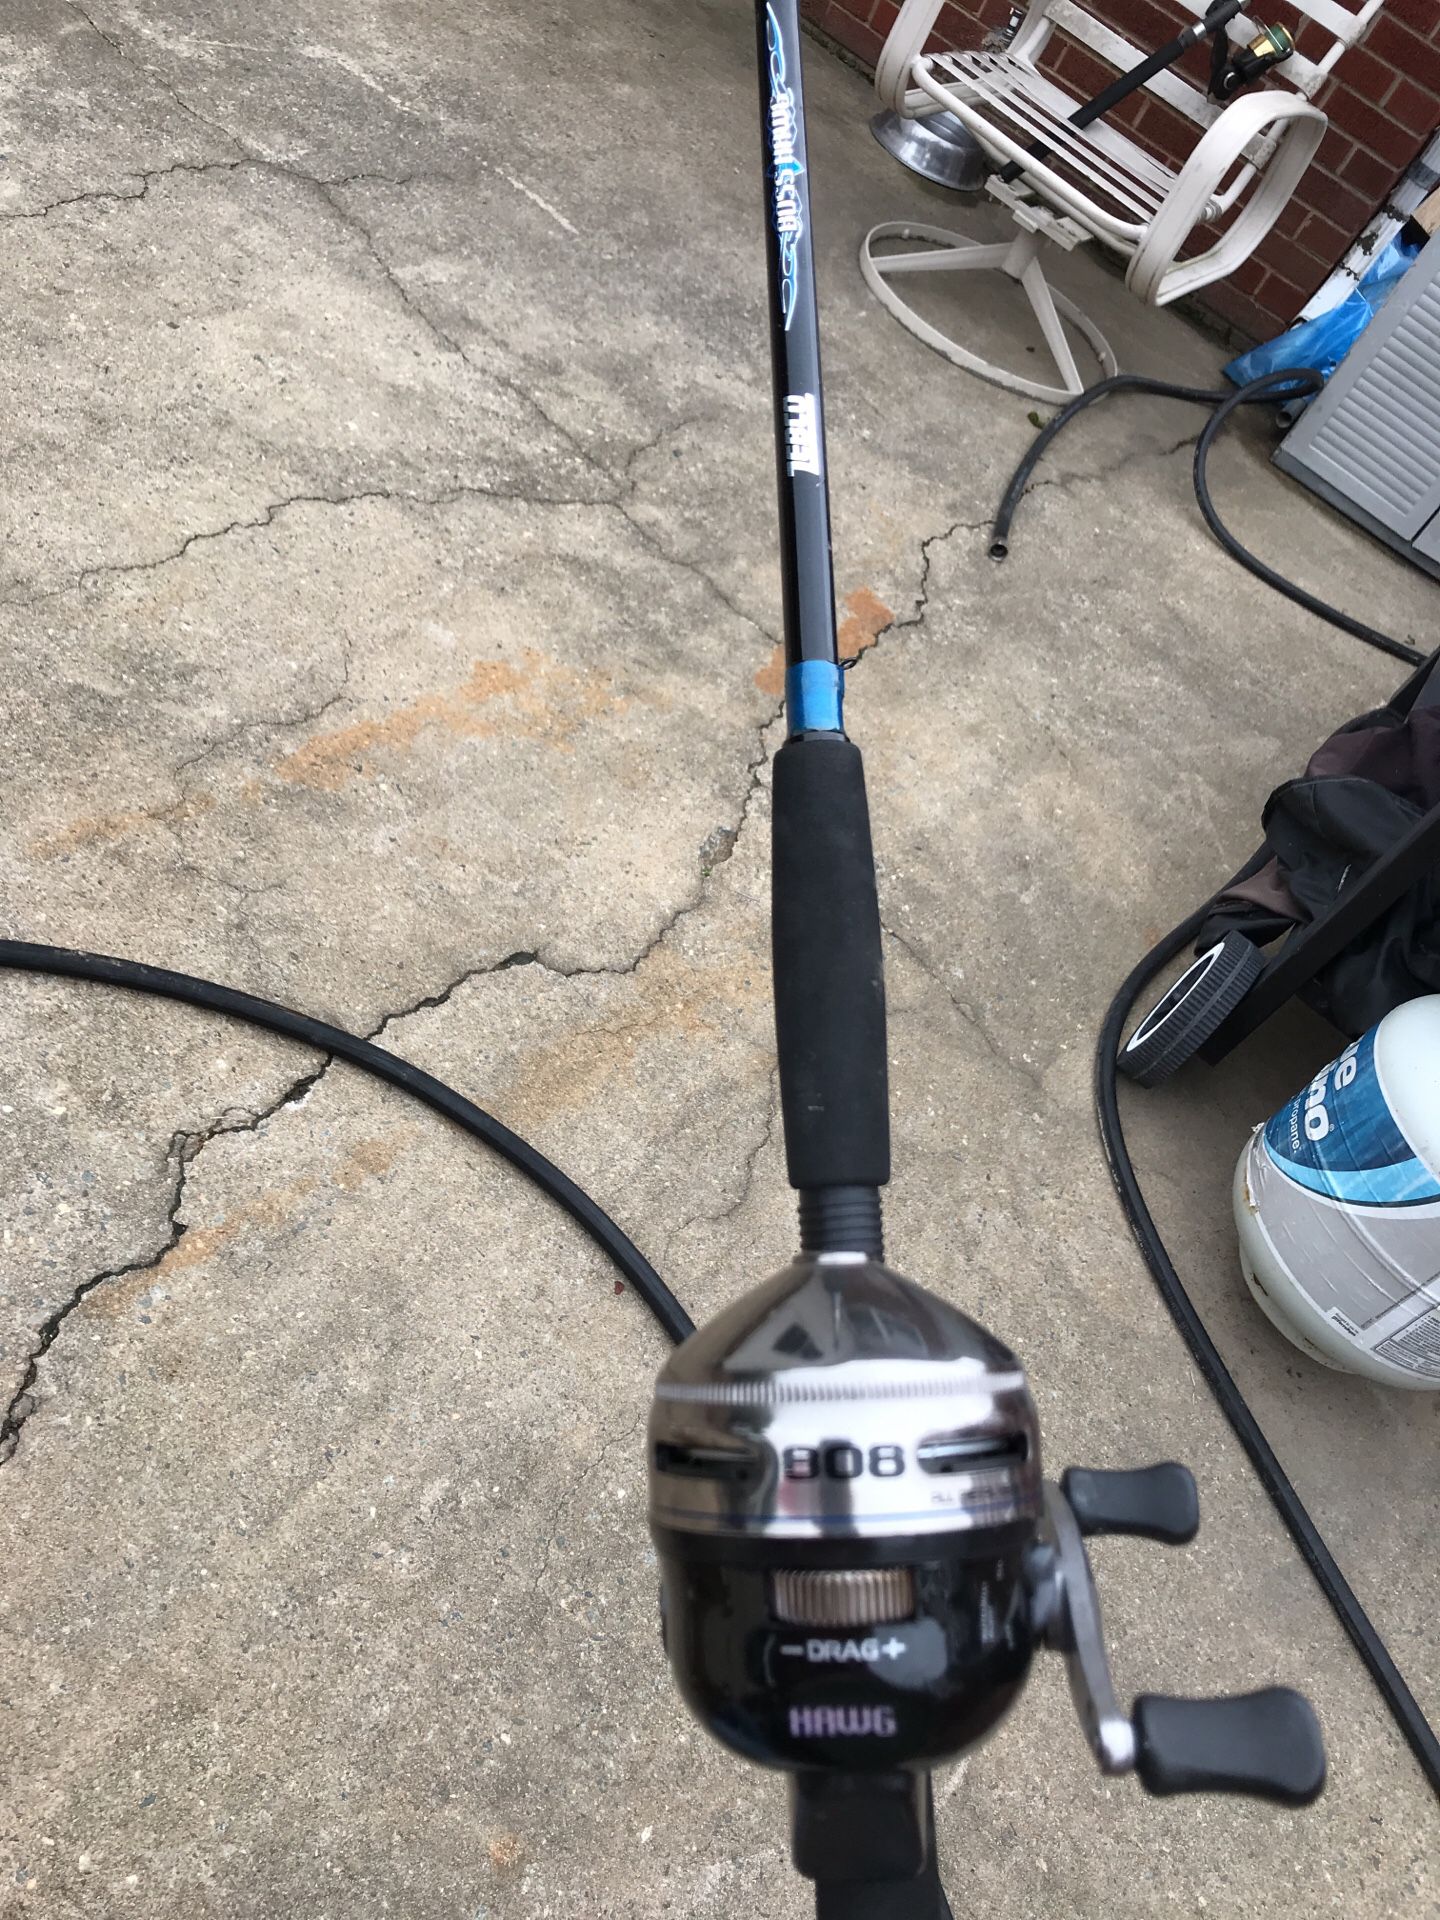 Zebco 808 fishing rod and reel for Sale in Randleman, NC - OfferUp